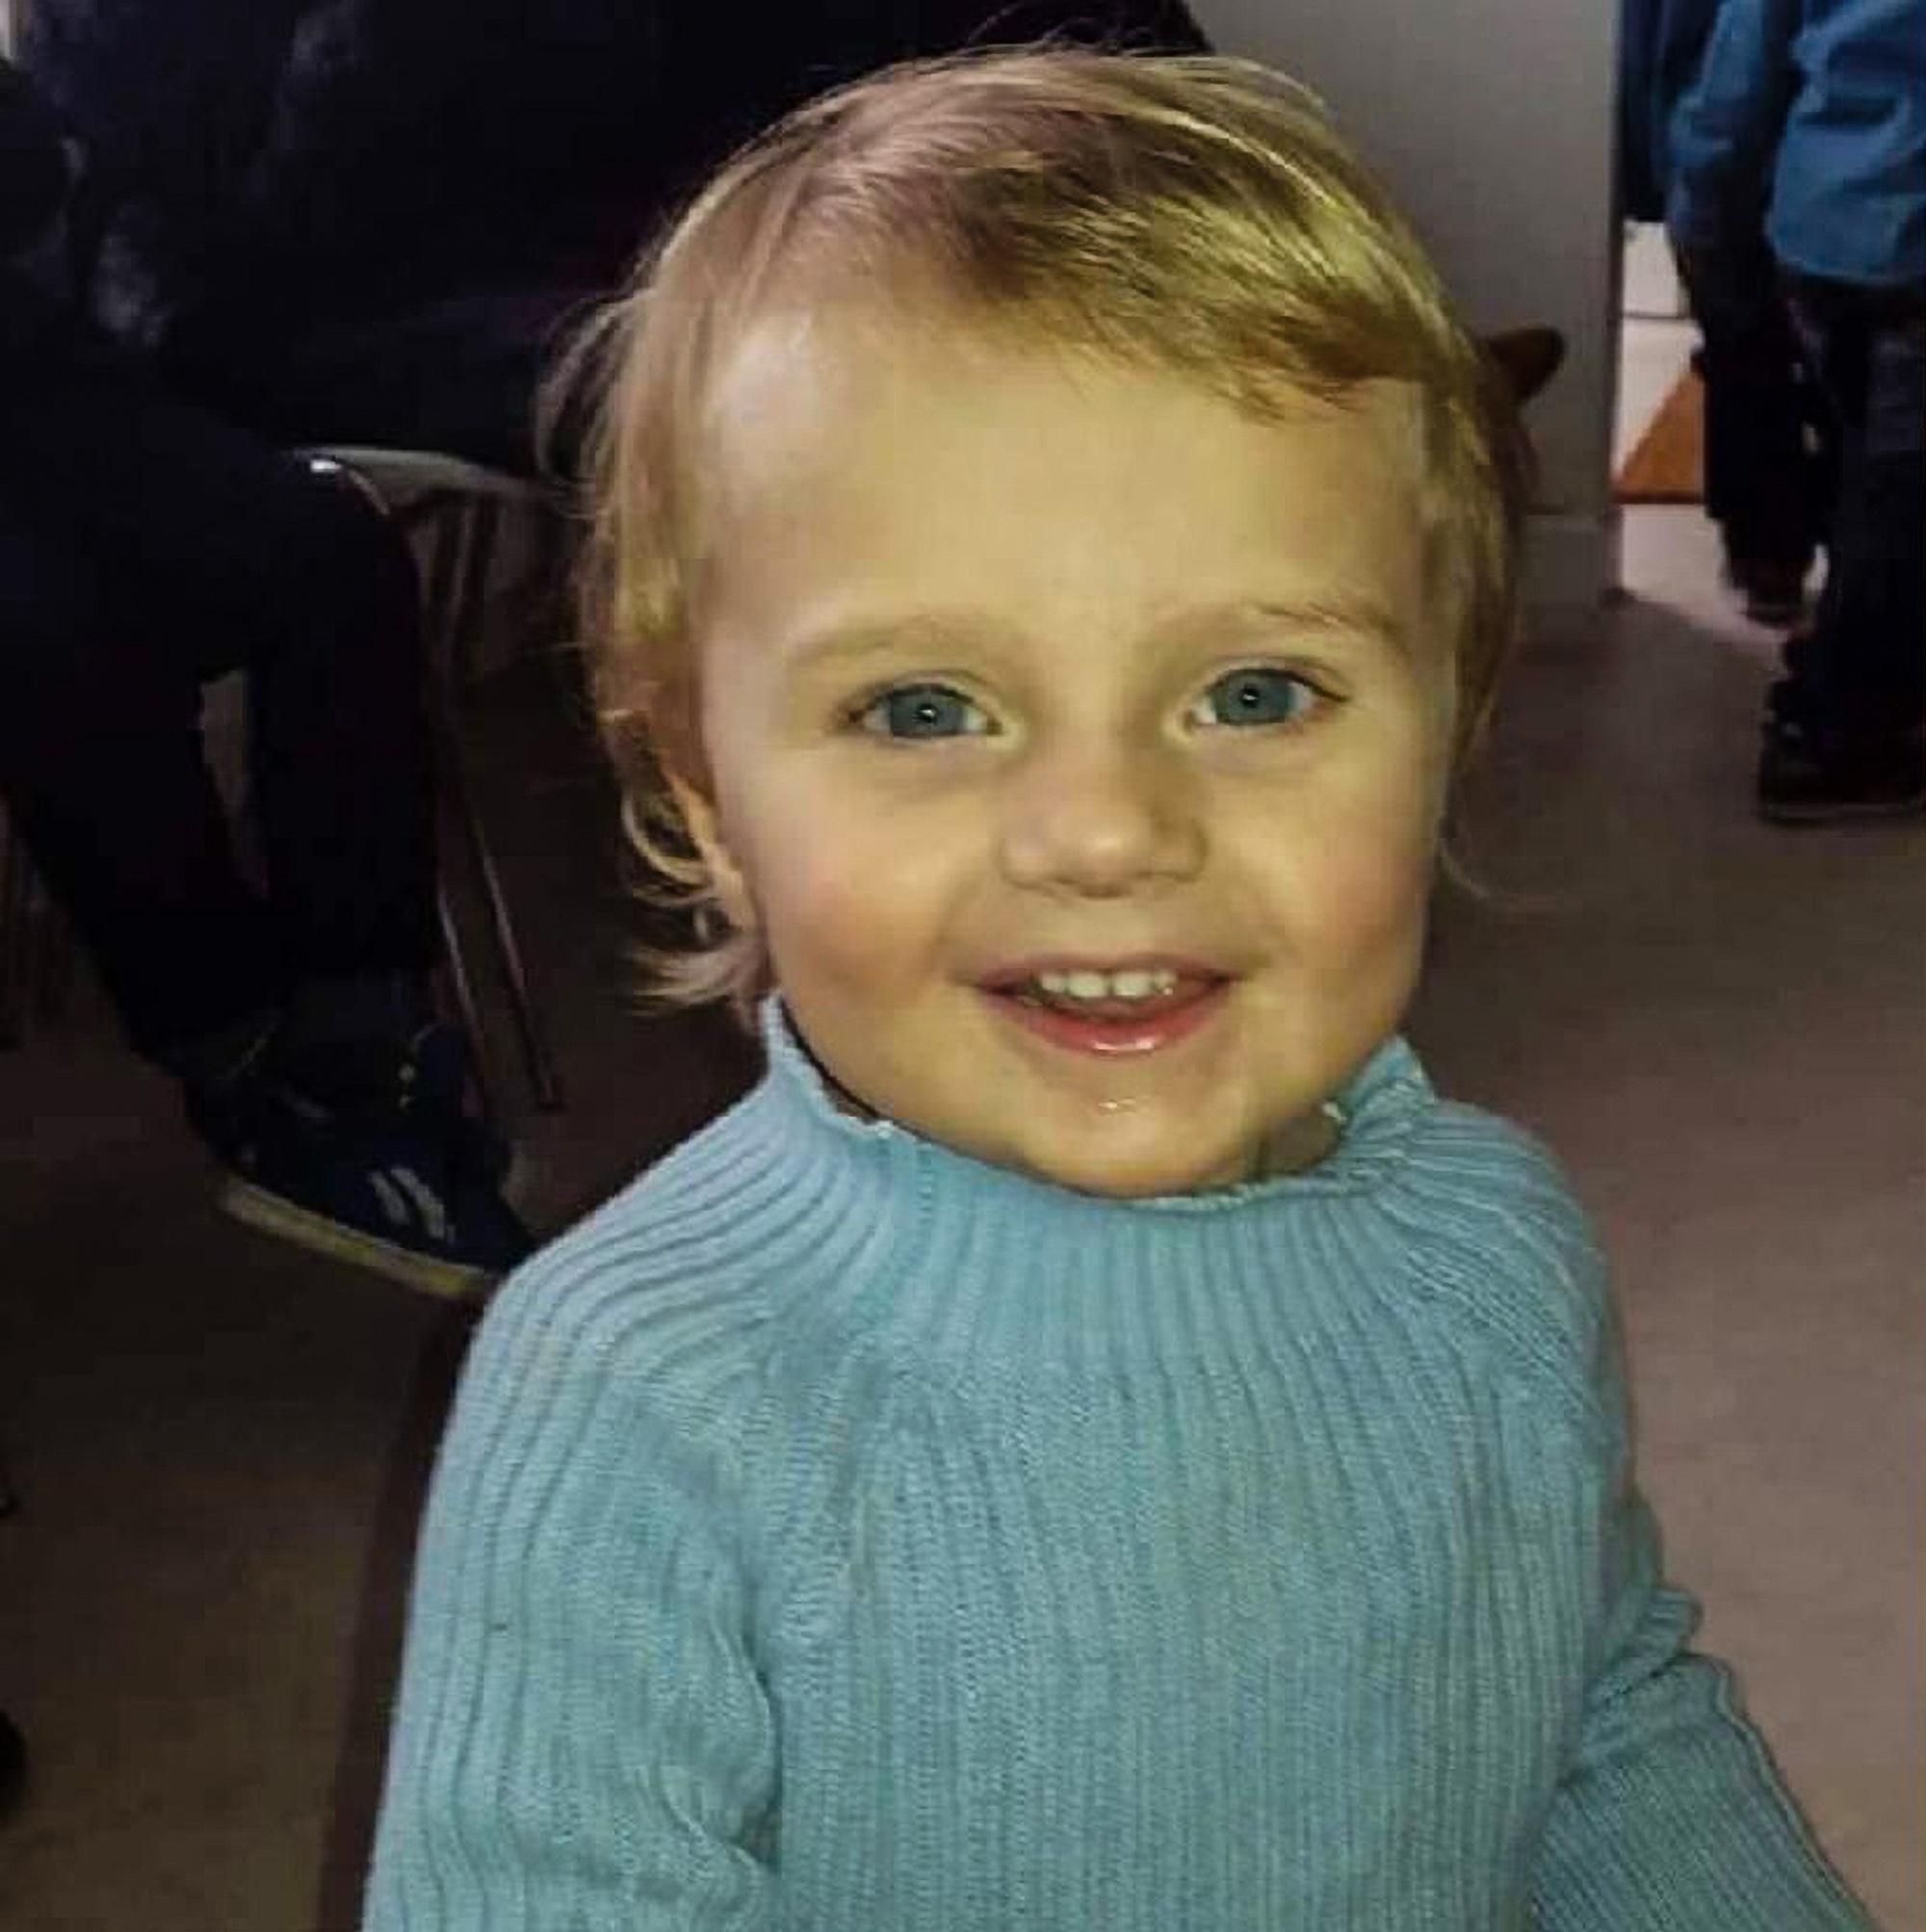 Read more about the article Cruel Stepdad On Trial For Torturing Boy, 3, To Death With Months Of Beatings